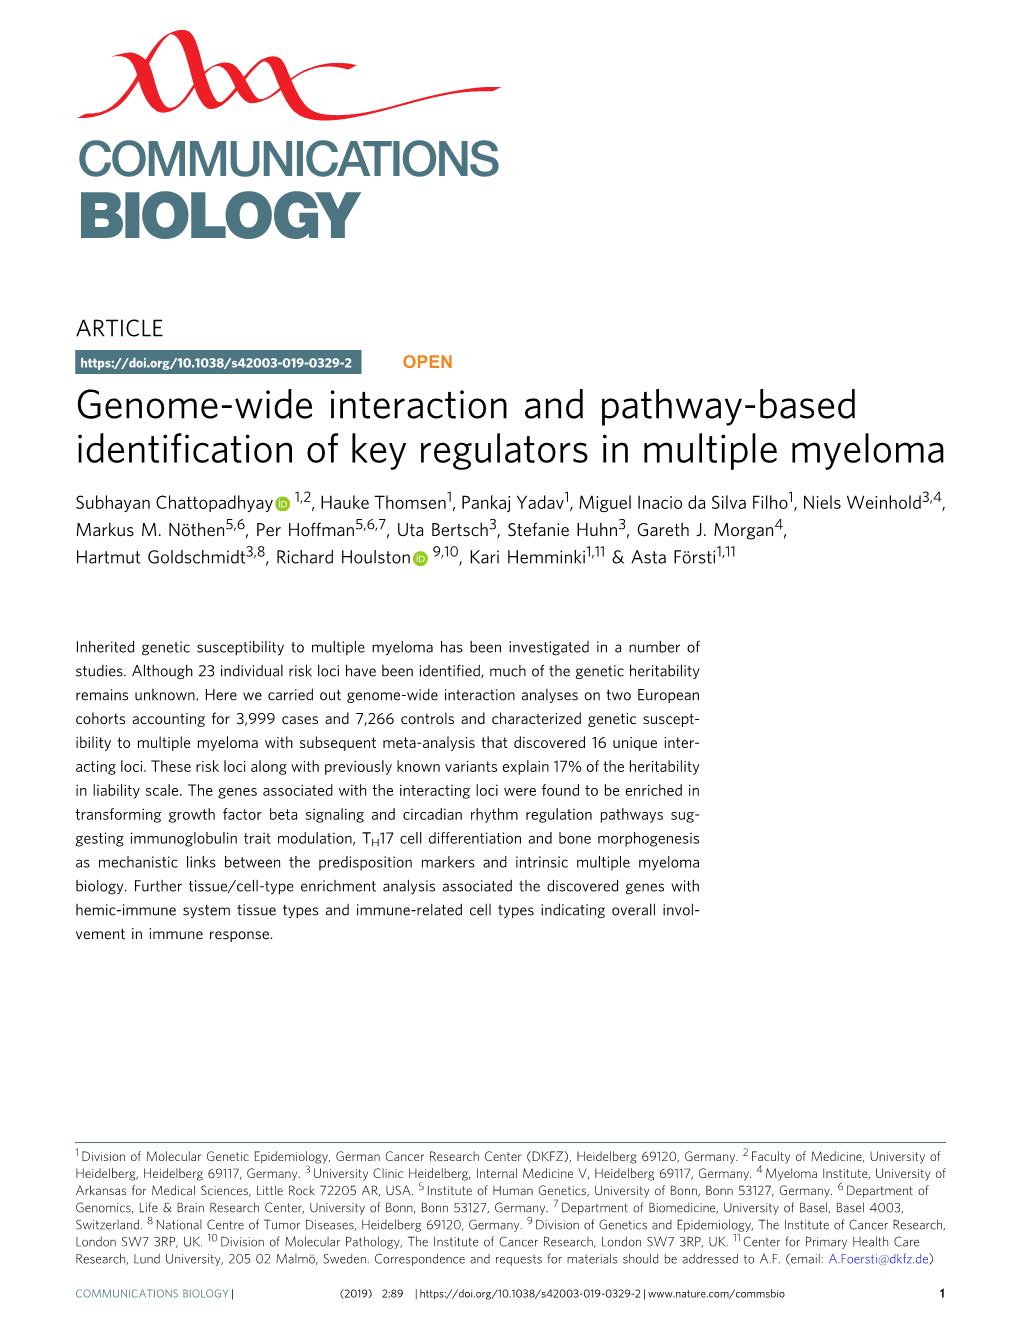 Genome-Wide Interaction and Pathway-Based Identification of Key Regulators in Multiple Myeloma